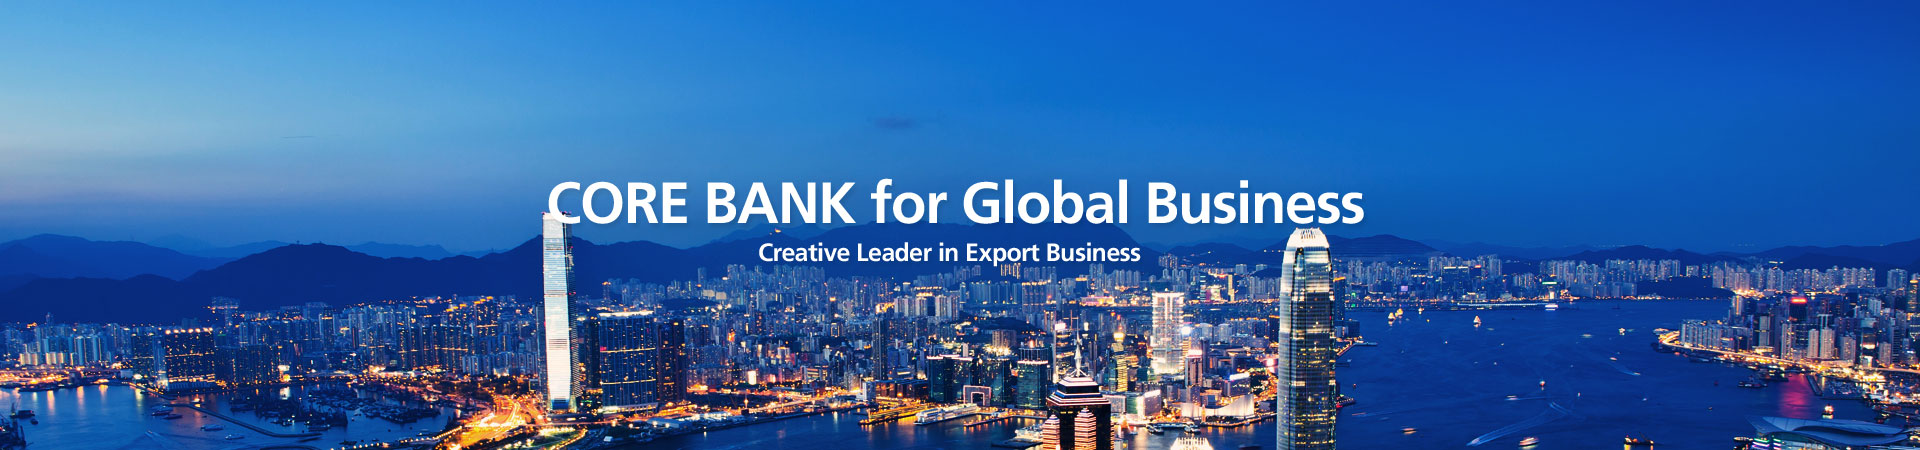 CORE BANK for Global Business - Creative Leader in Export Business